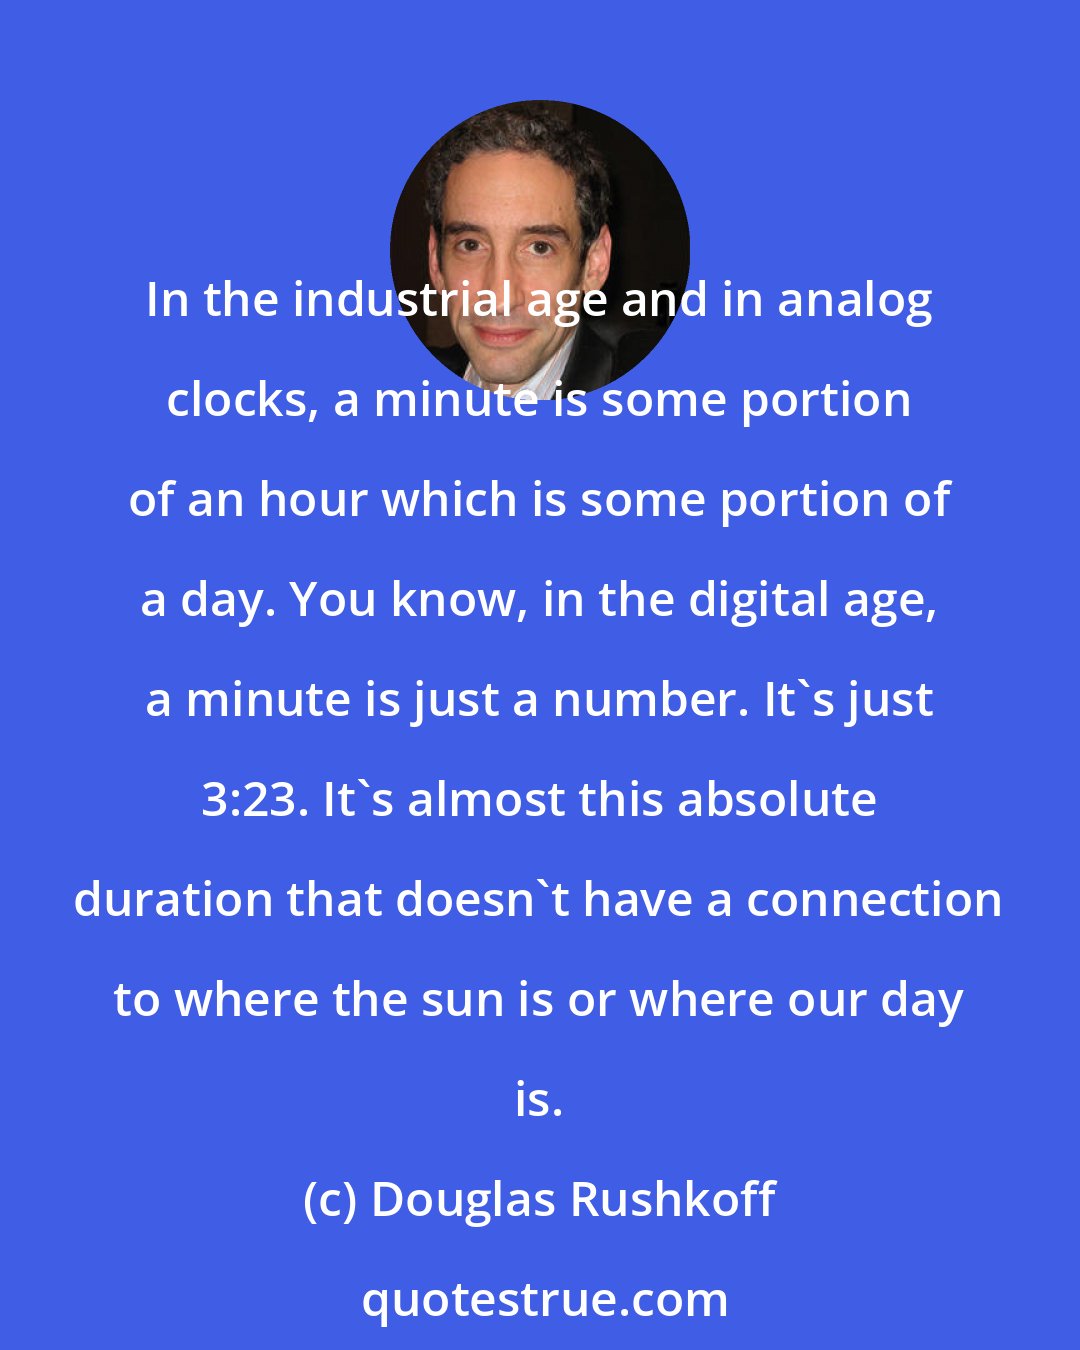 Douglas Rushkoff: In the industrial age and in analog clocks, a minute is some portion of an hour which is some portion of a day. You know, in the digital age, a minute is just a number. It's just 3:23. It's almost this absolute duration that doesn't have a connection to where the sun is or where our day is.